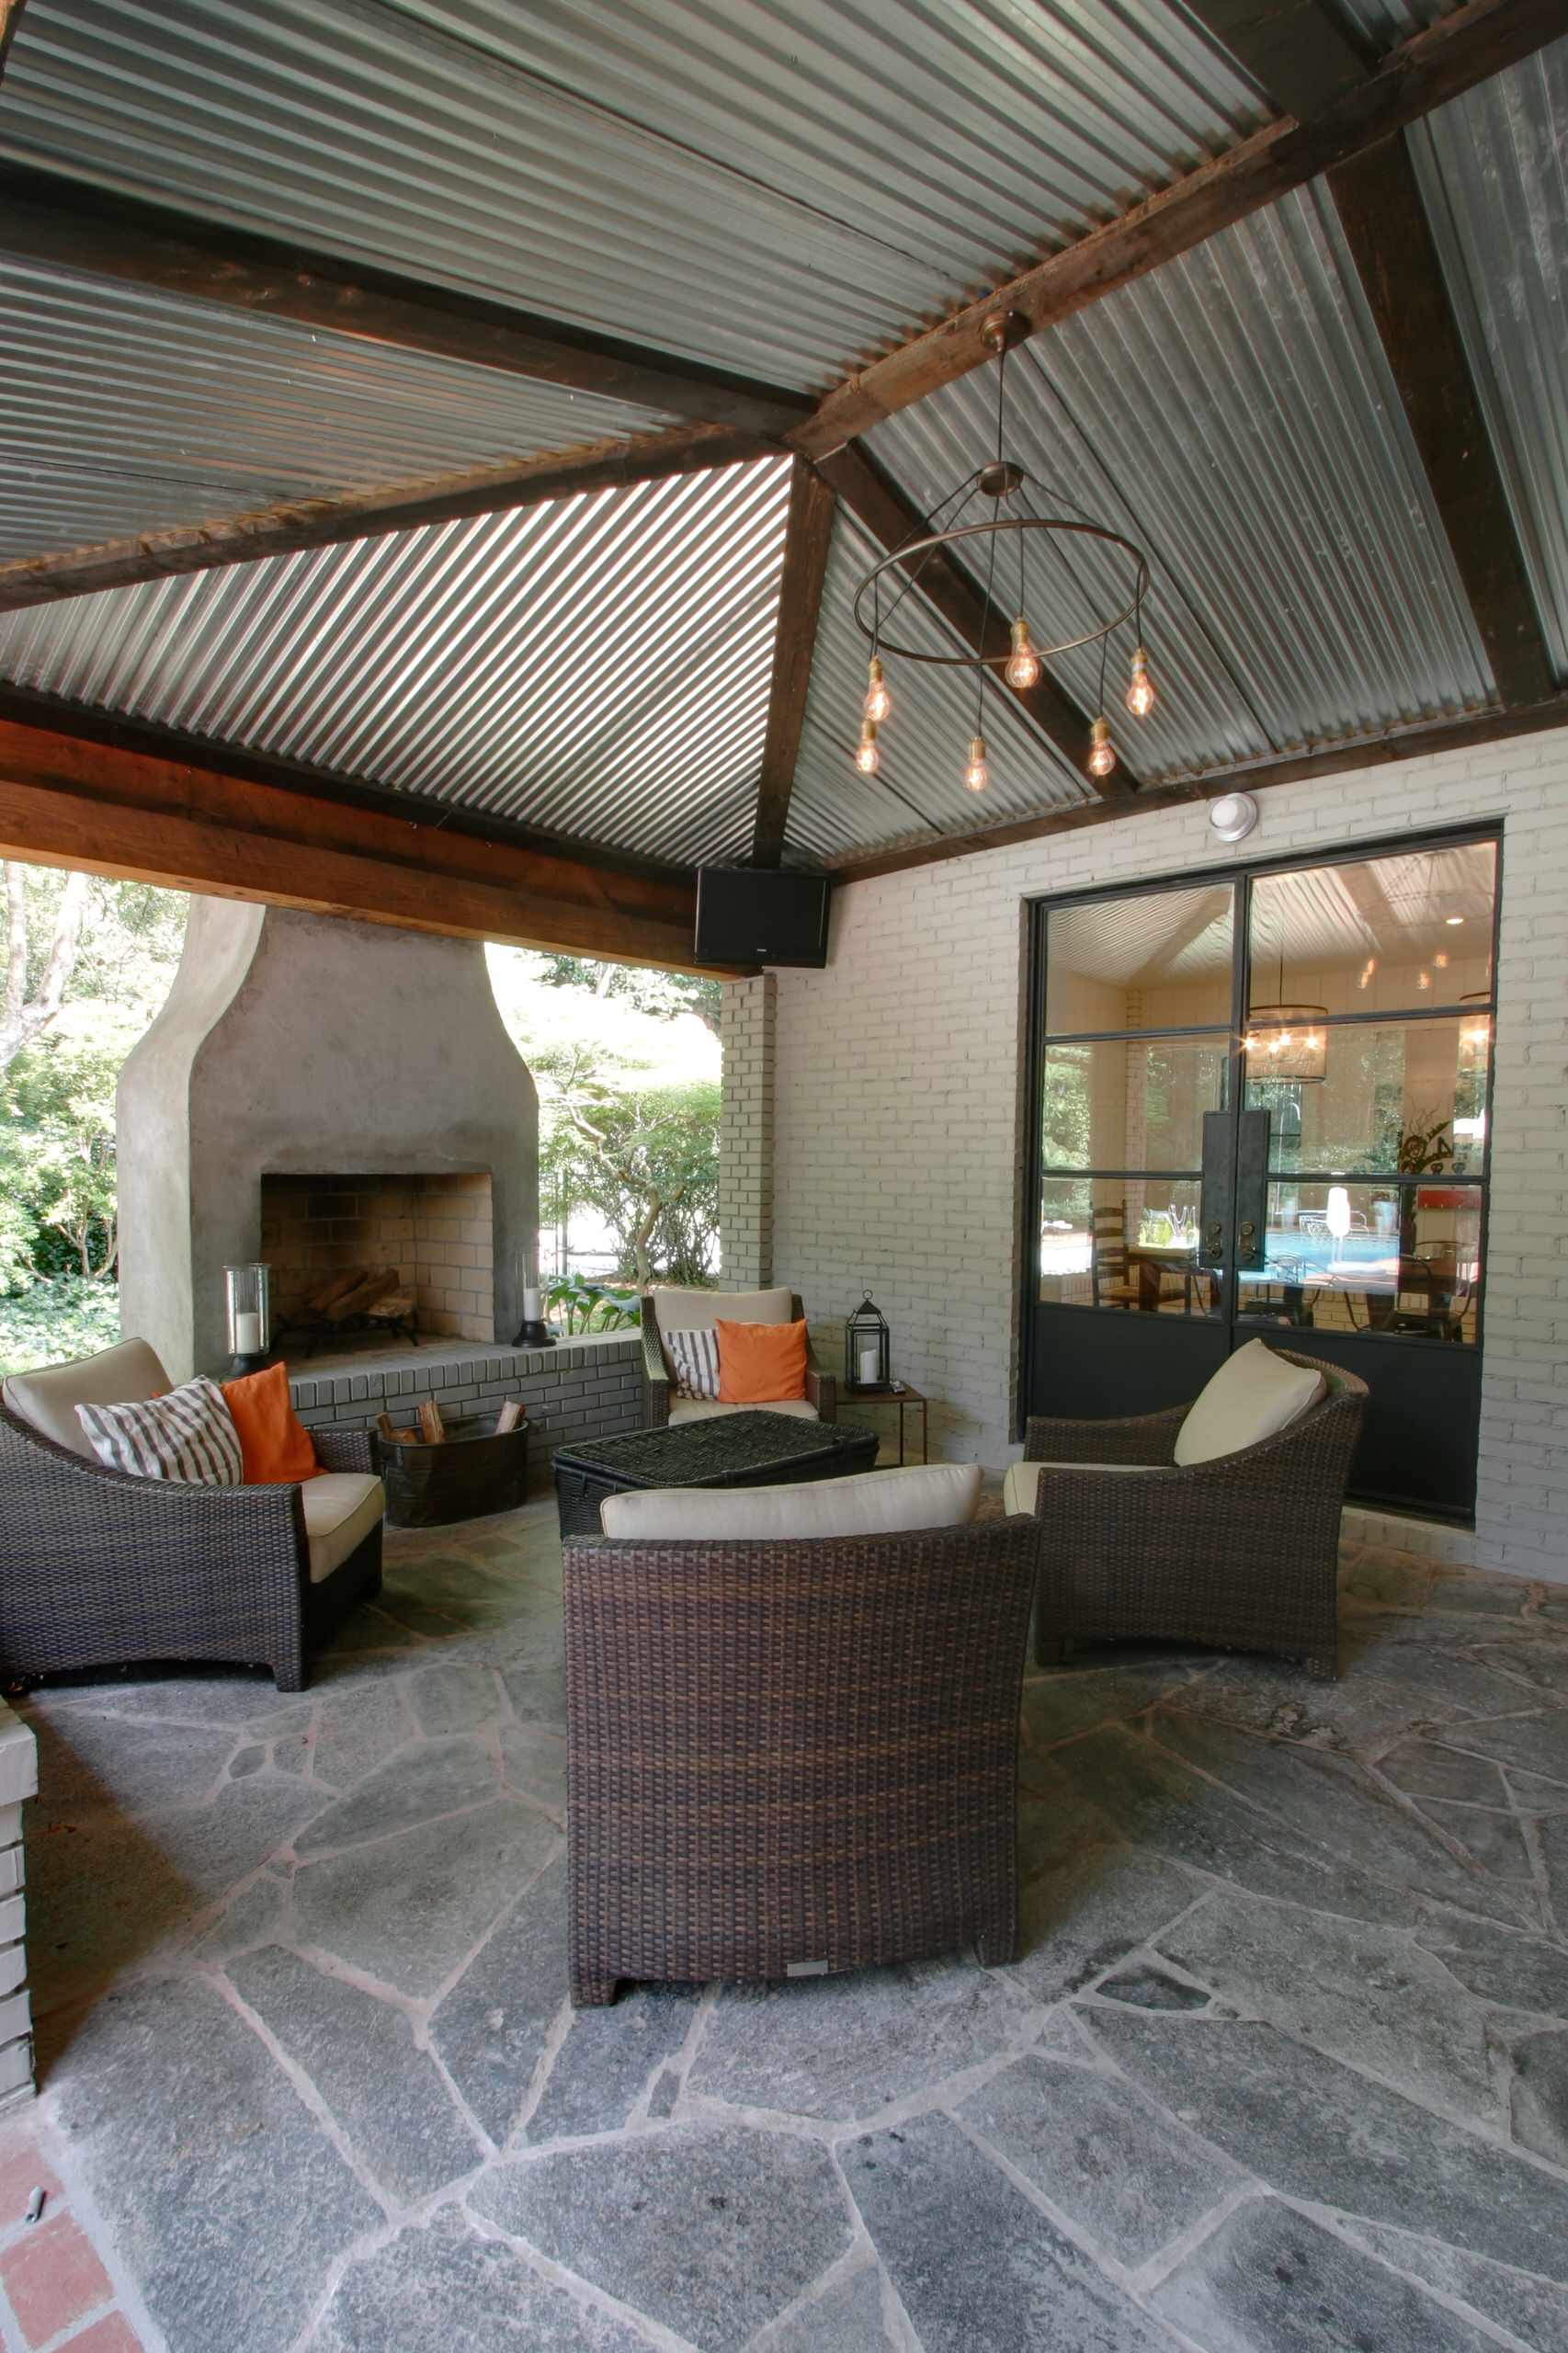 Corrugated Metal Roof Patio Ideas Photos Houzz - Diy Corrugated Metal Patio Cover